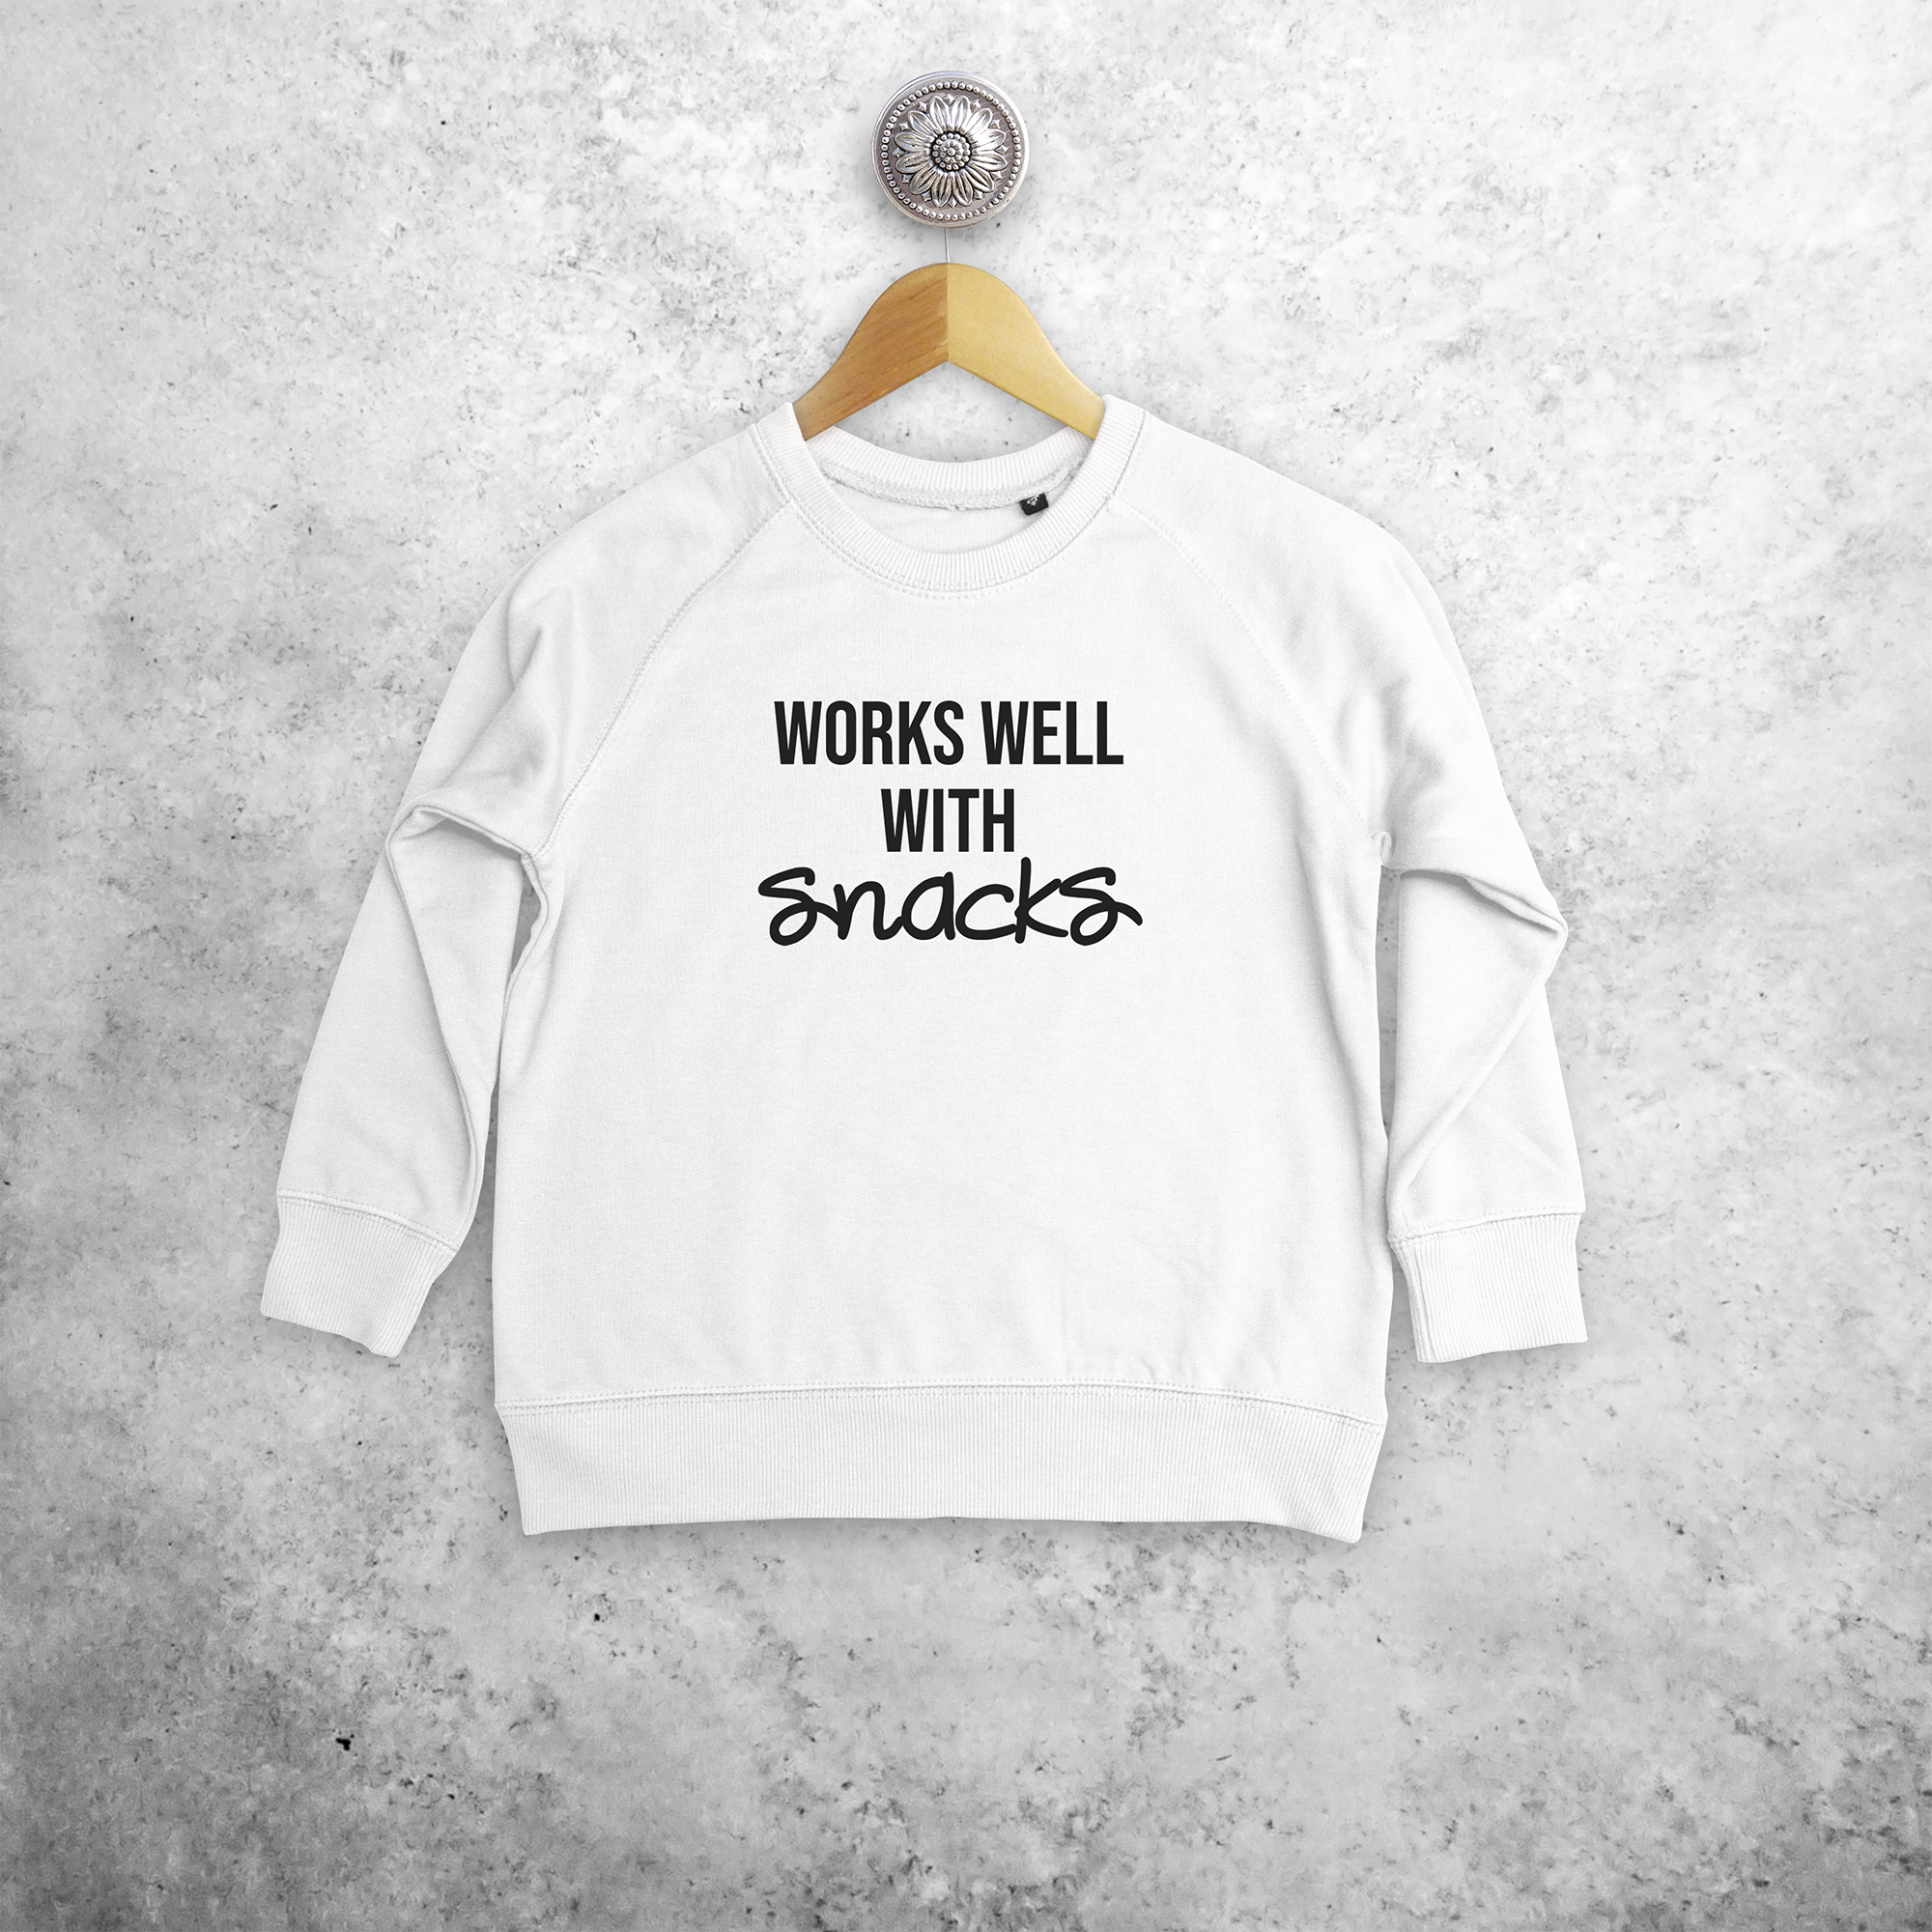 'Works well with snacks' kids sweater